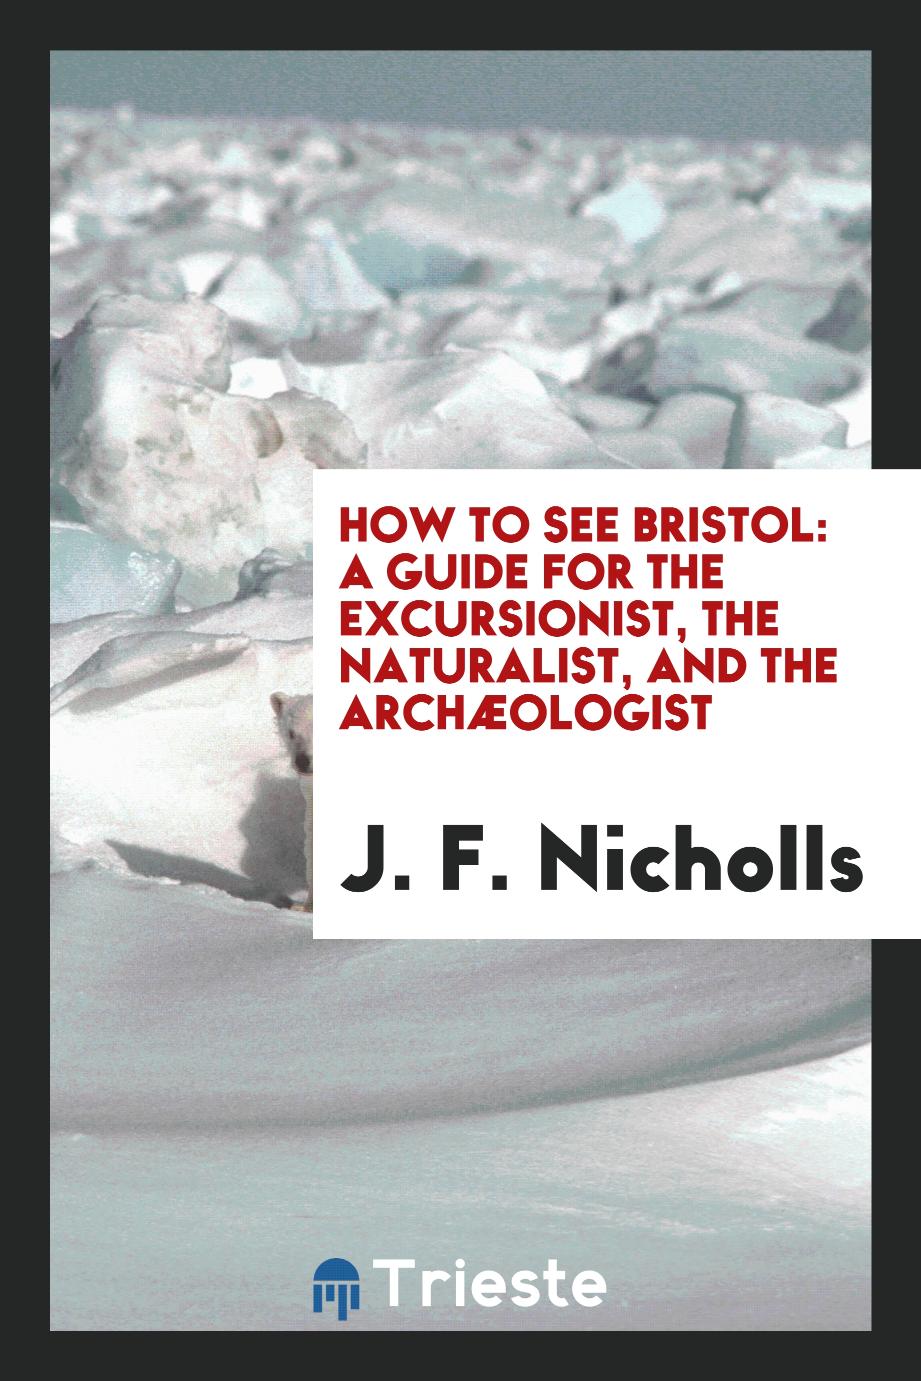 How to See Bristol: A Guide for the Excursionist, the Naturalist, and the Archæologist